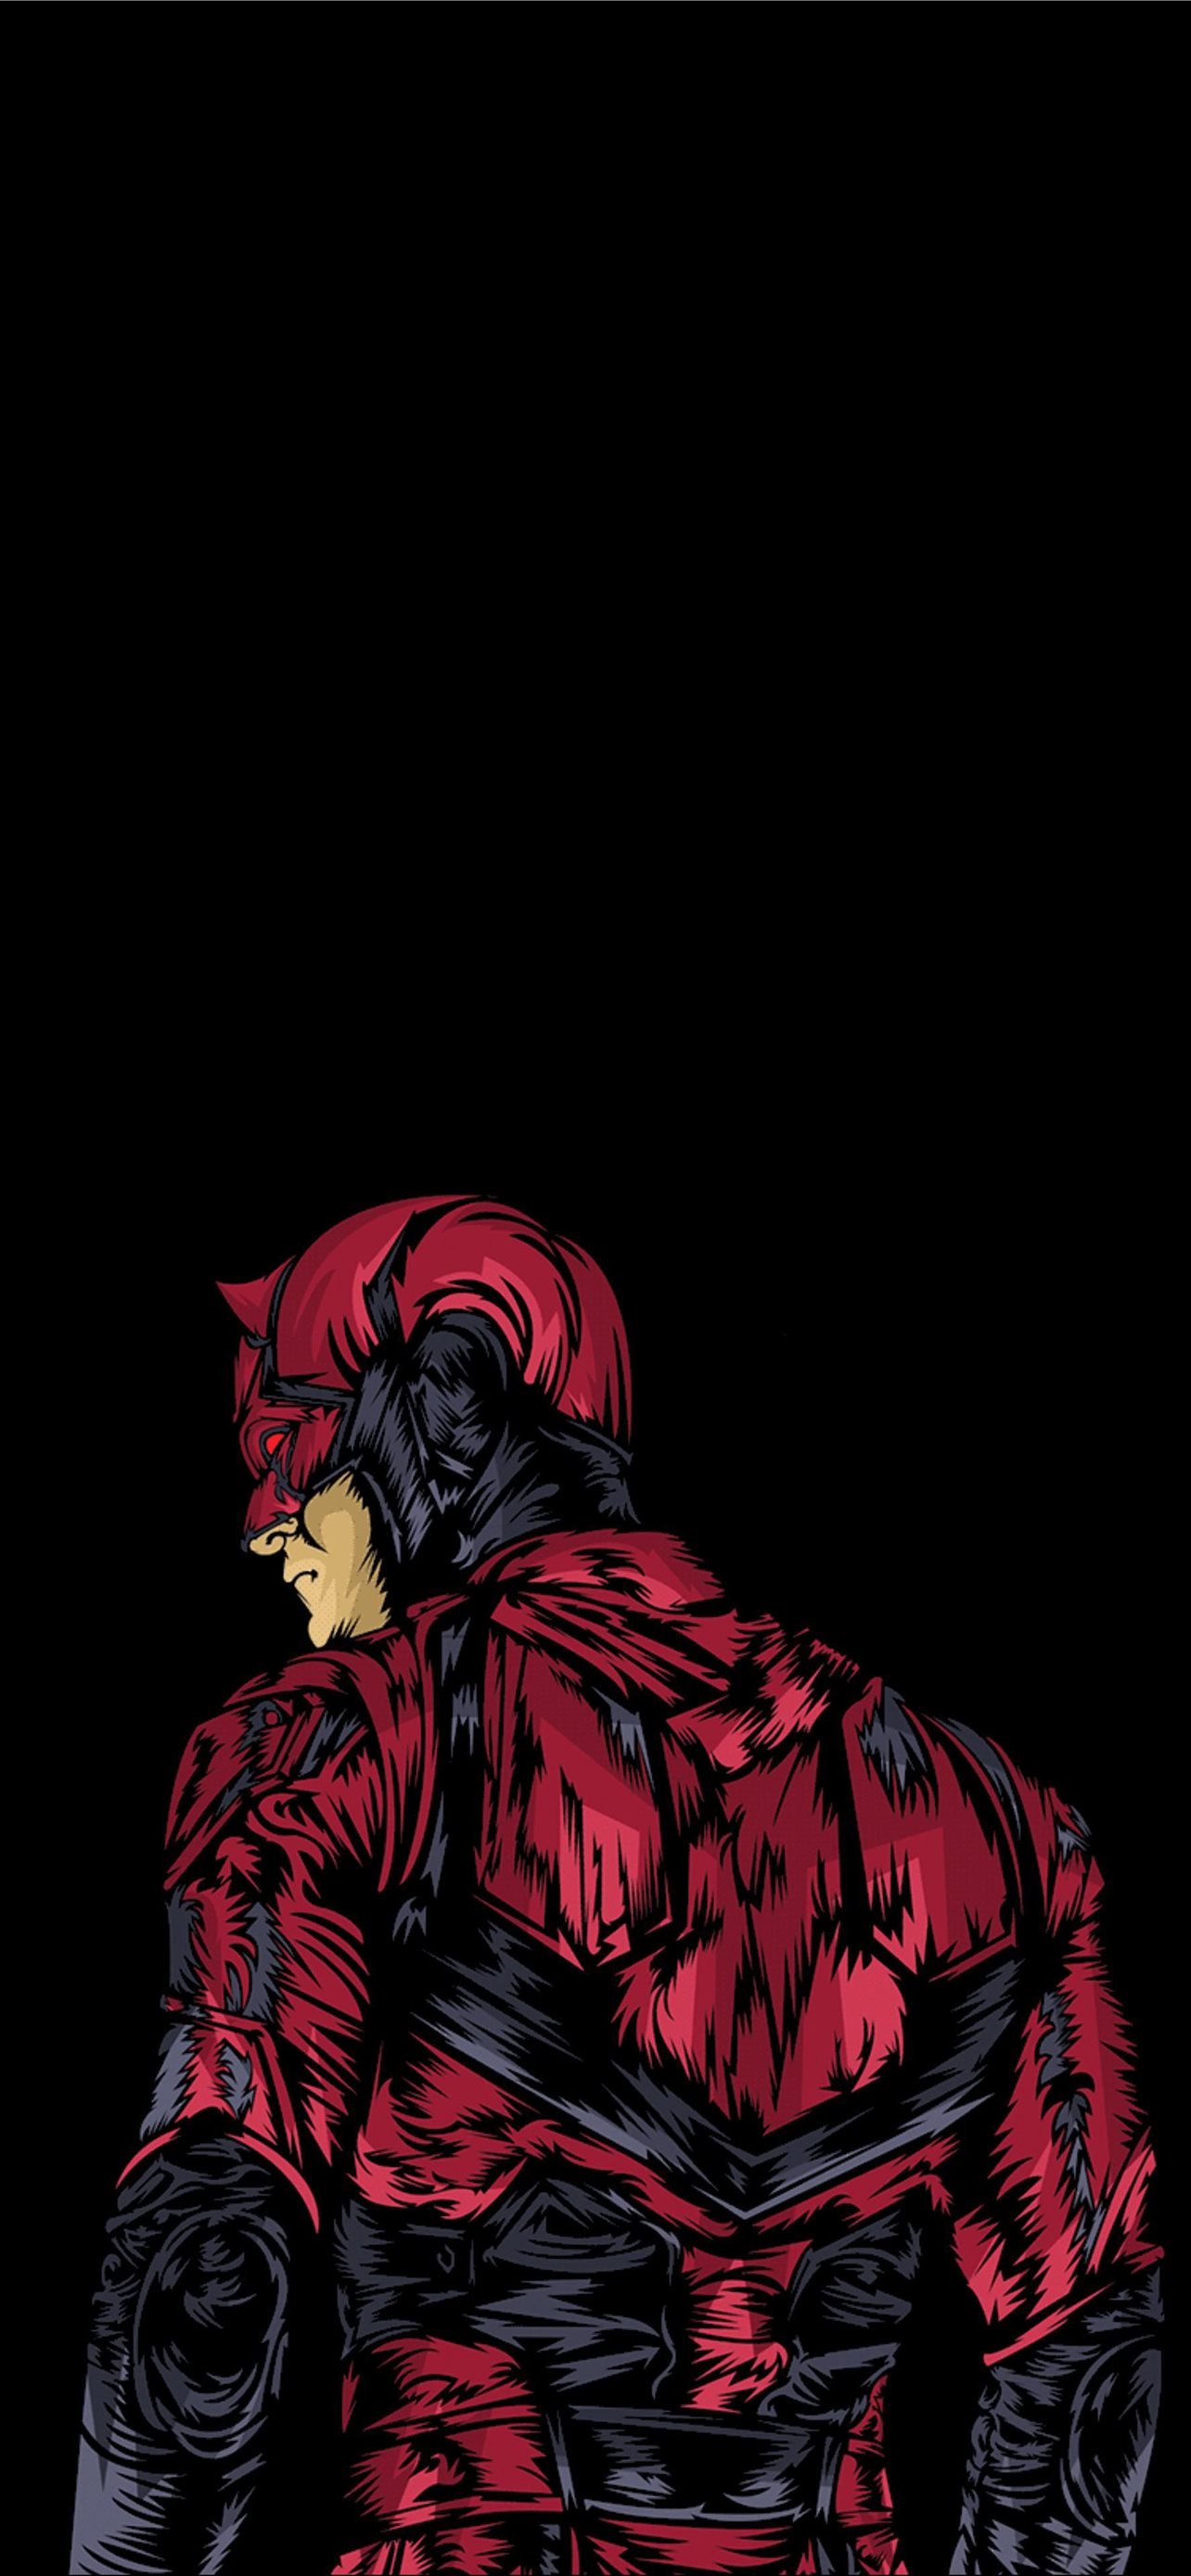 Cool Daredevil Top Free Cool Daredevil Background. iPhone Wallpaper Free Download